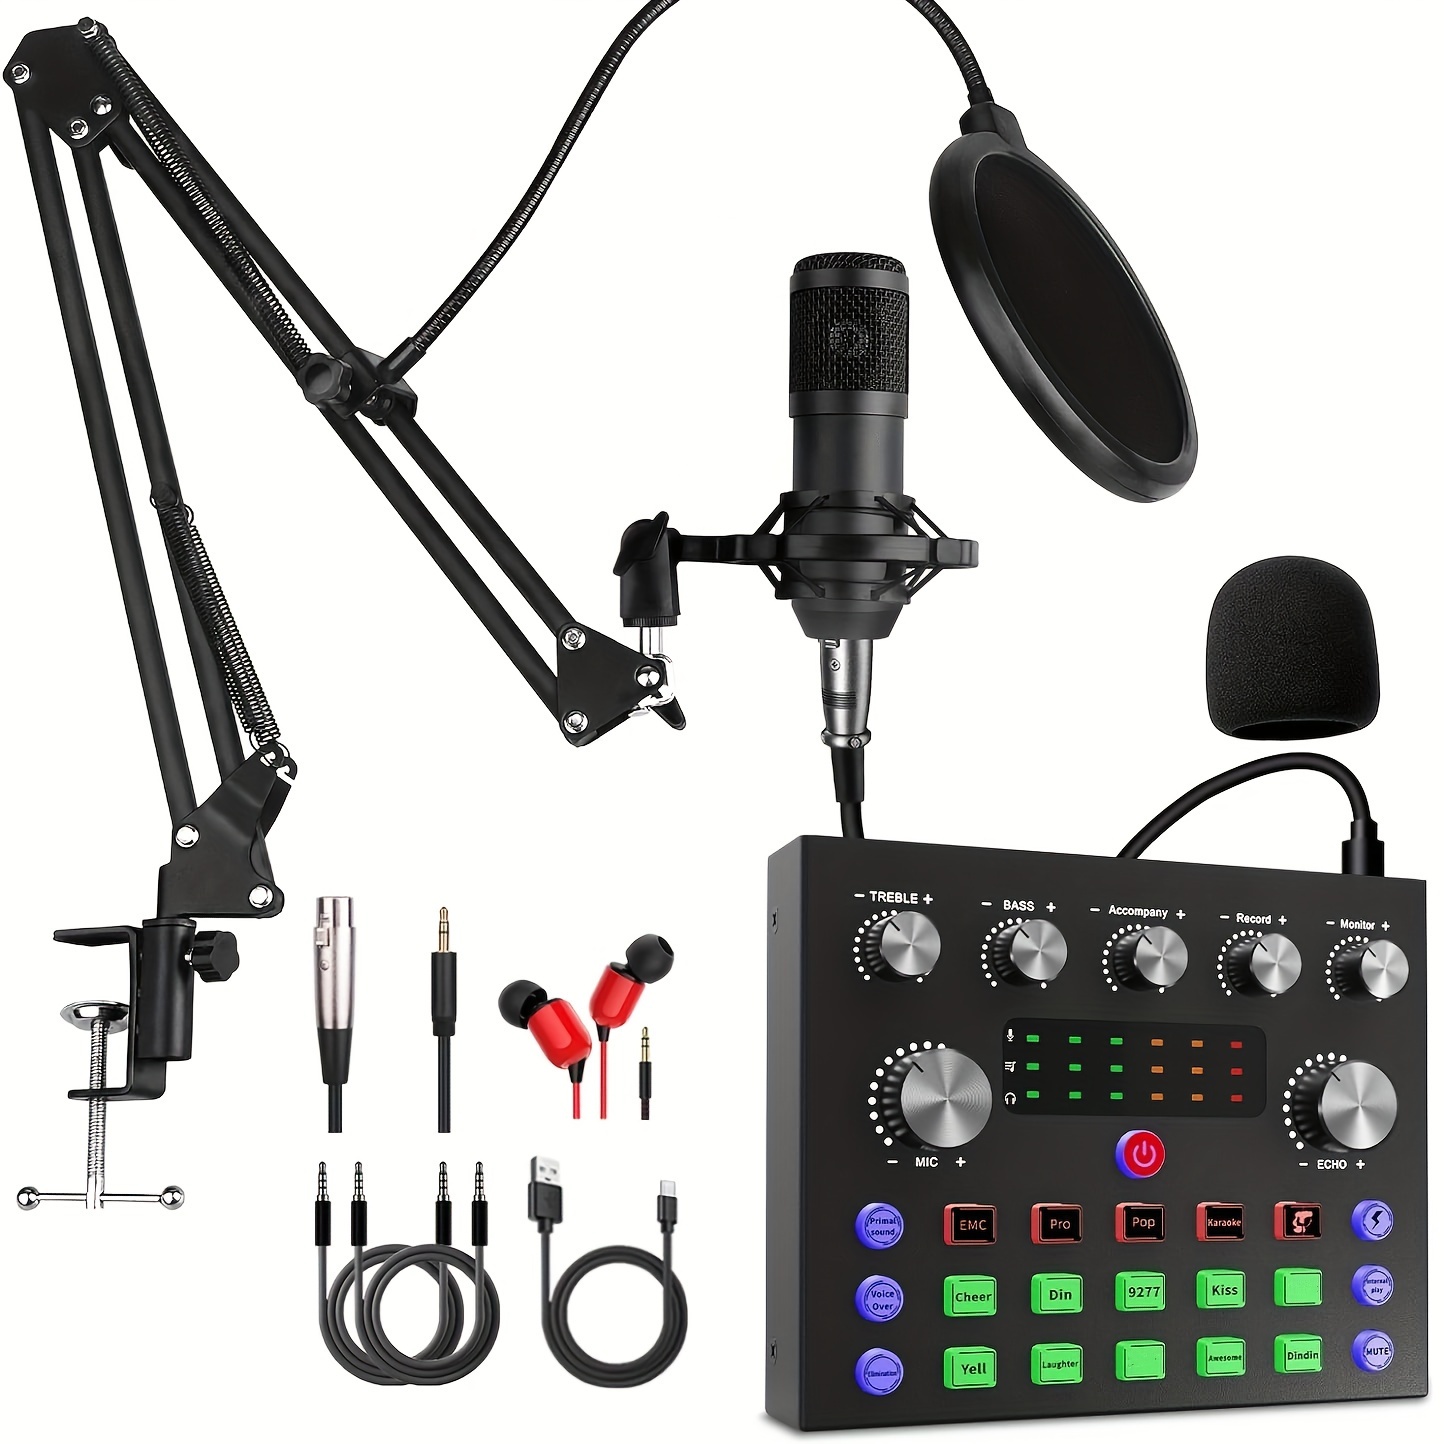 

Podcast Equipment Bundle, Audio Interface With Dj Mixer Sound Mixer Microphone Perfect Recording For Pc/laptop/smartphone